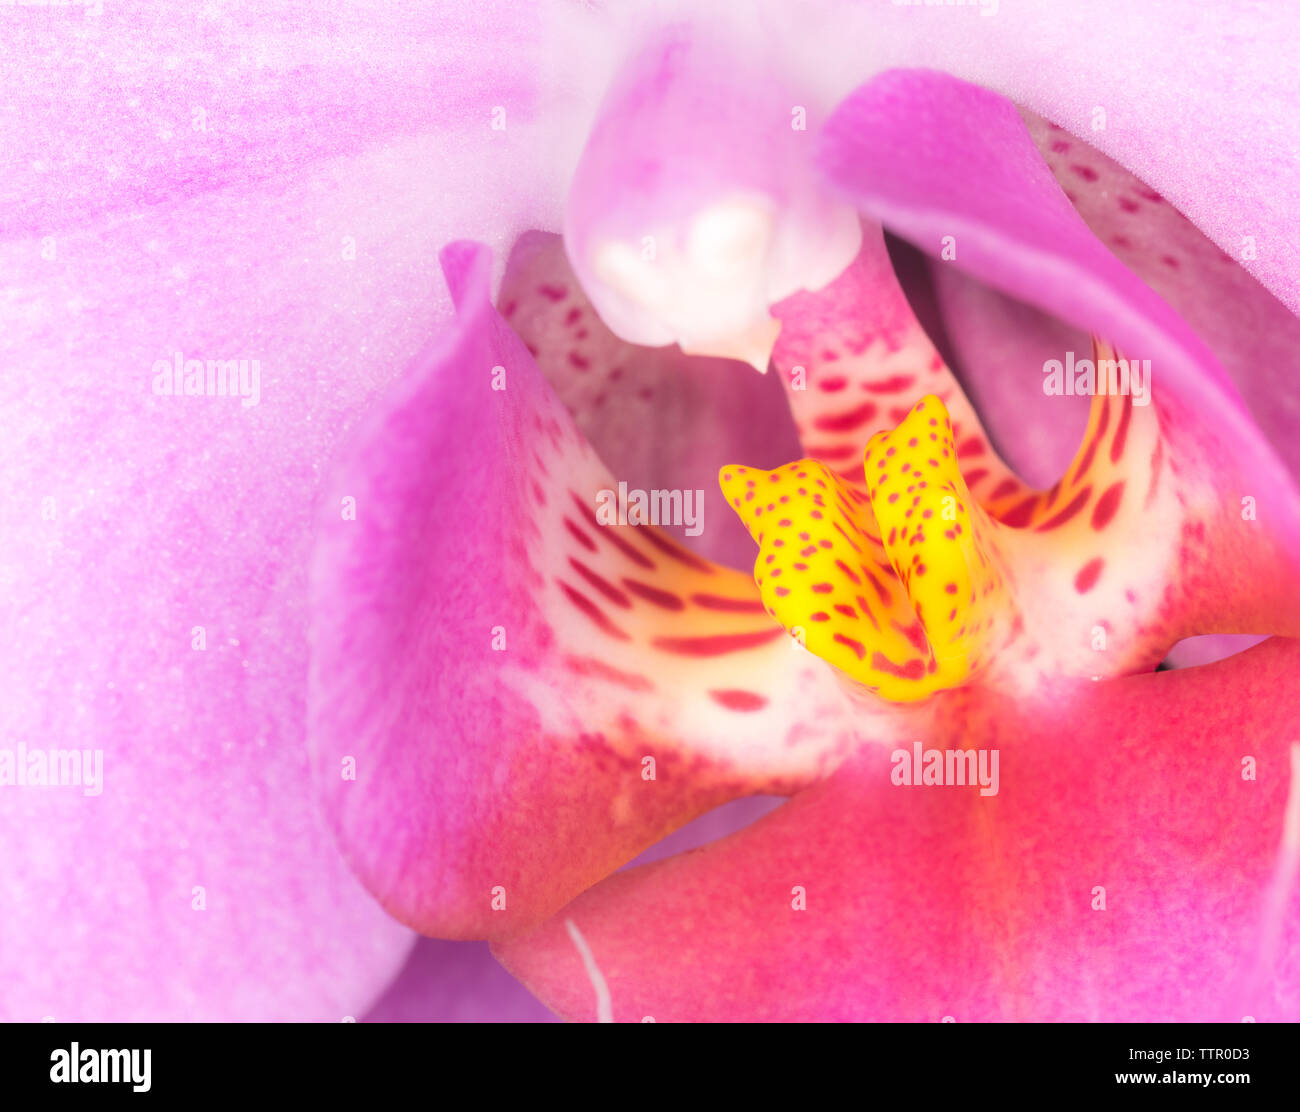 Japanese Anemone - cheerful, pink ruffled petals and centers of gleaming gold. Pink flower close up Stock Photo